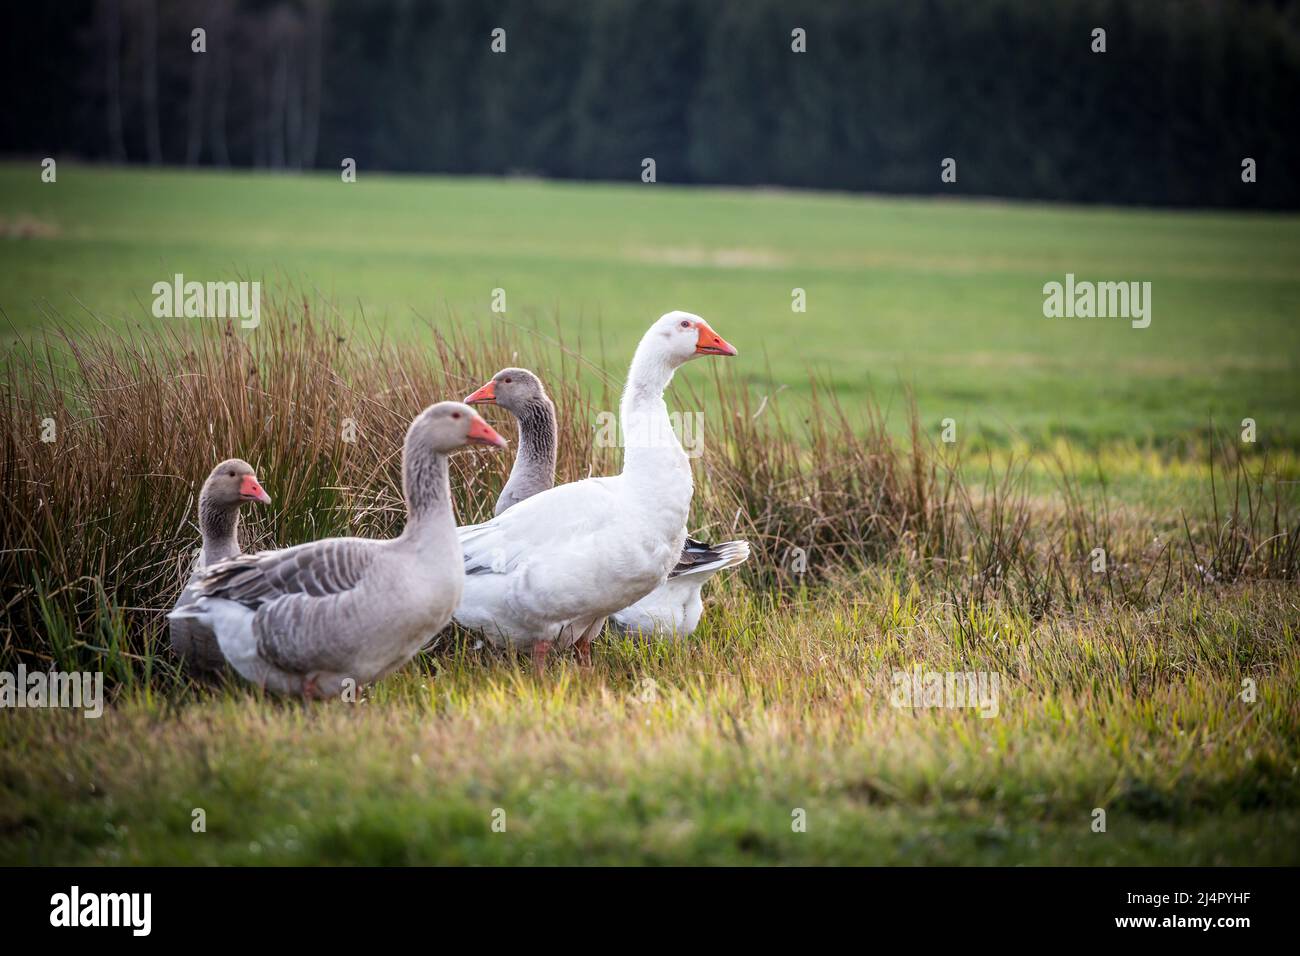 Flock of geese, geese family of the breed 'Österreichische Landgans', an endangered goose breed from Austria Stock Photo